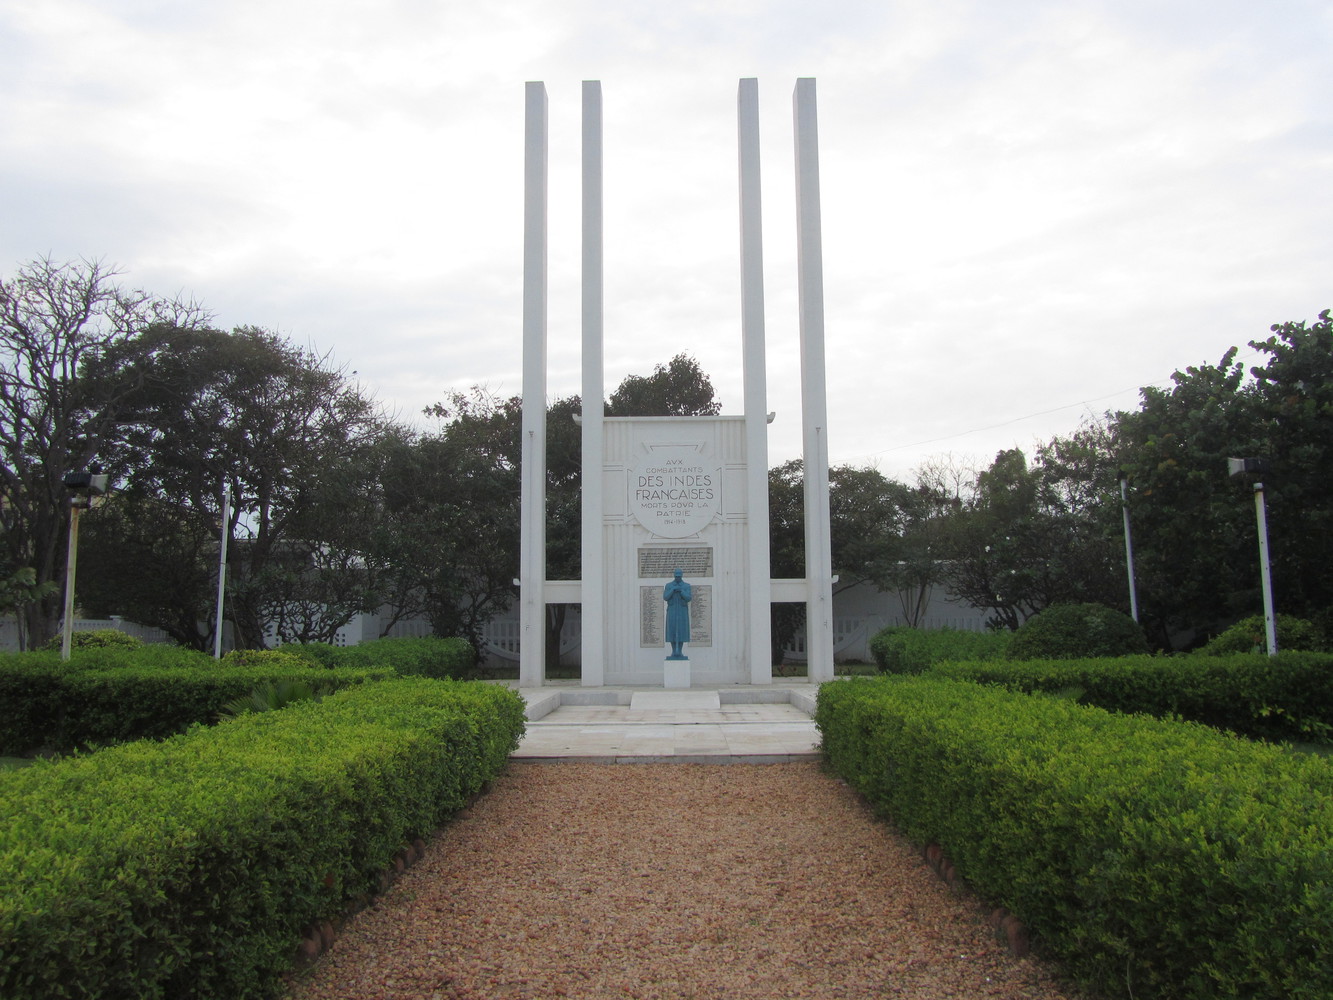 A war memorial with four white pillars, a white board with bronze plaques, and a statue